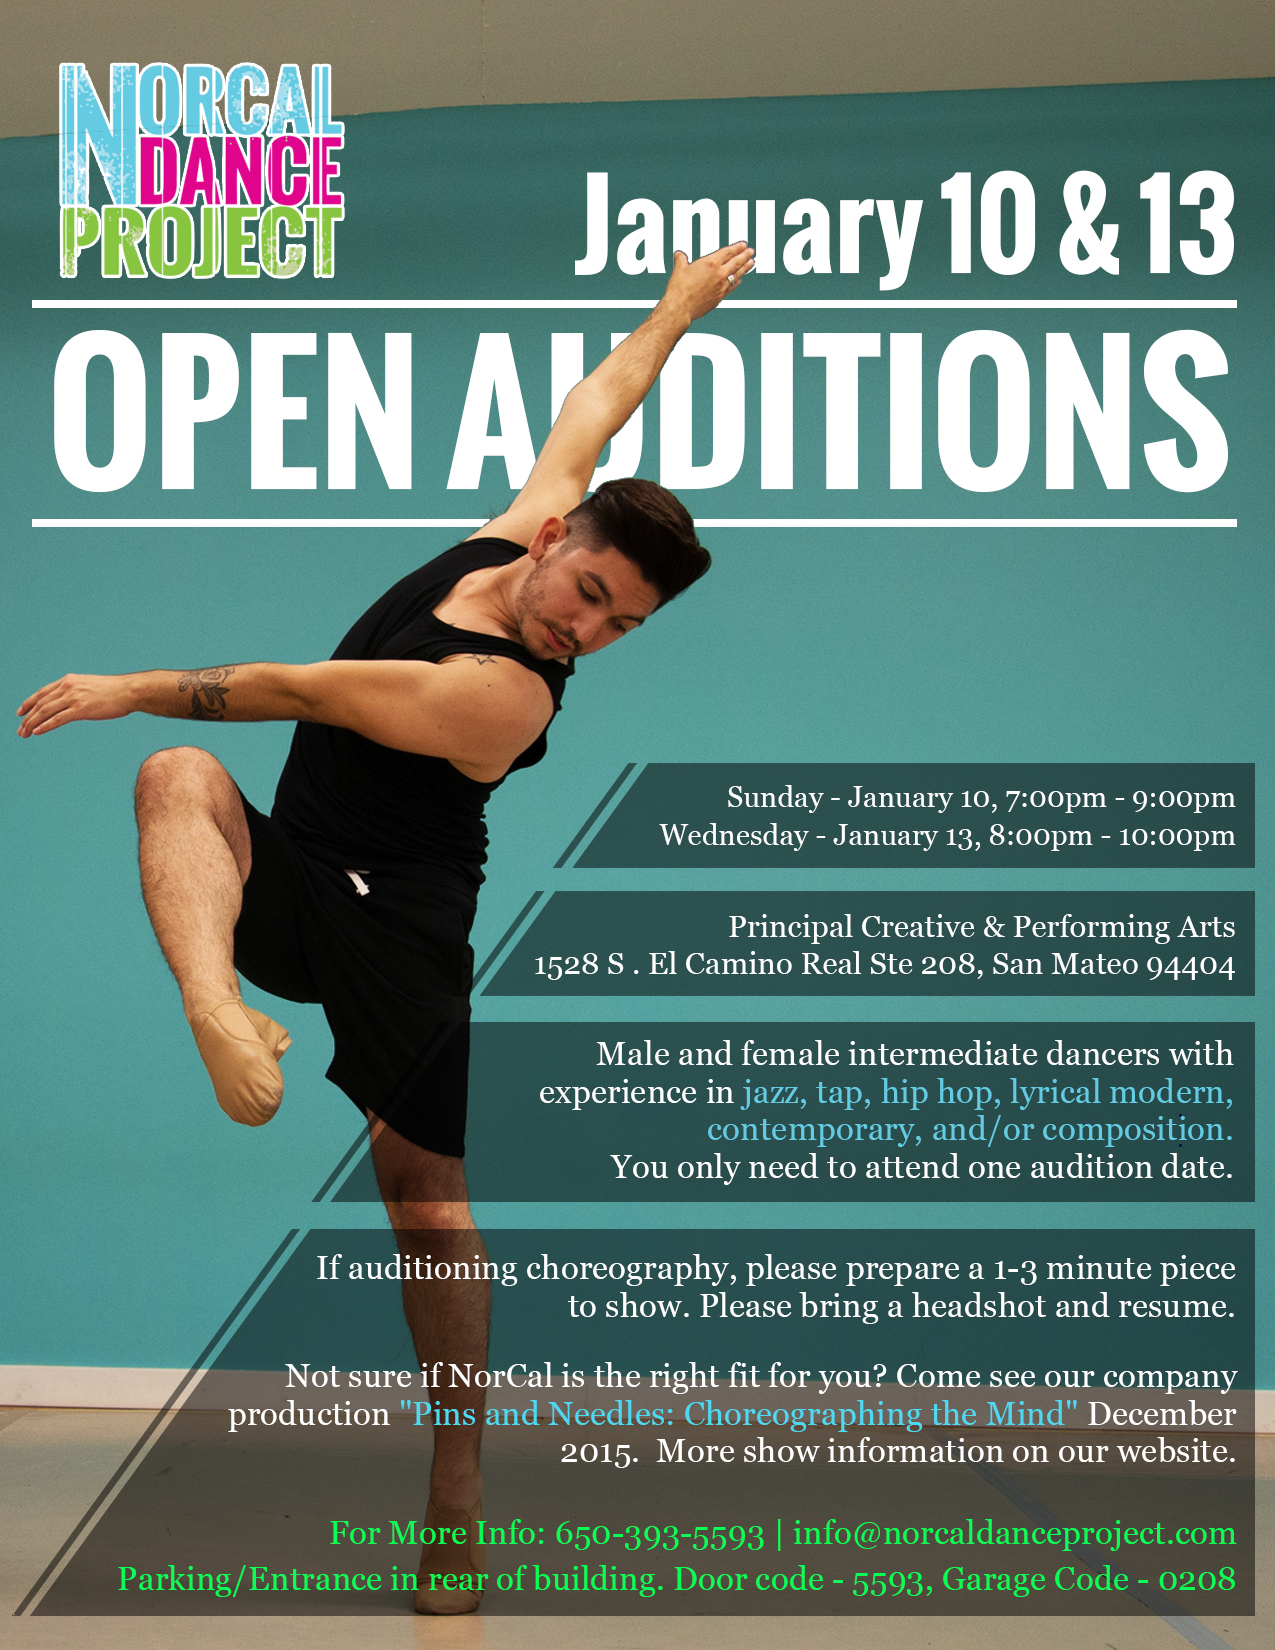 Dance Auditions For NorCal Dance Project - January 10 & 13, 2015